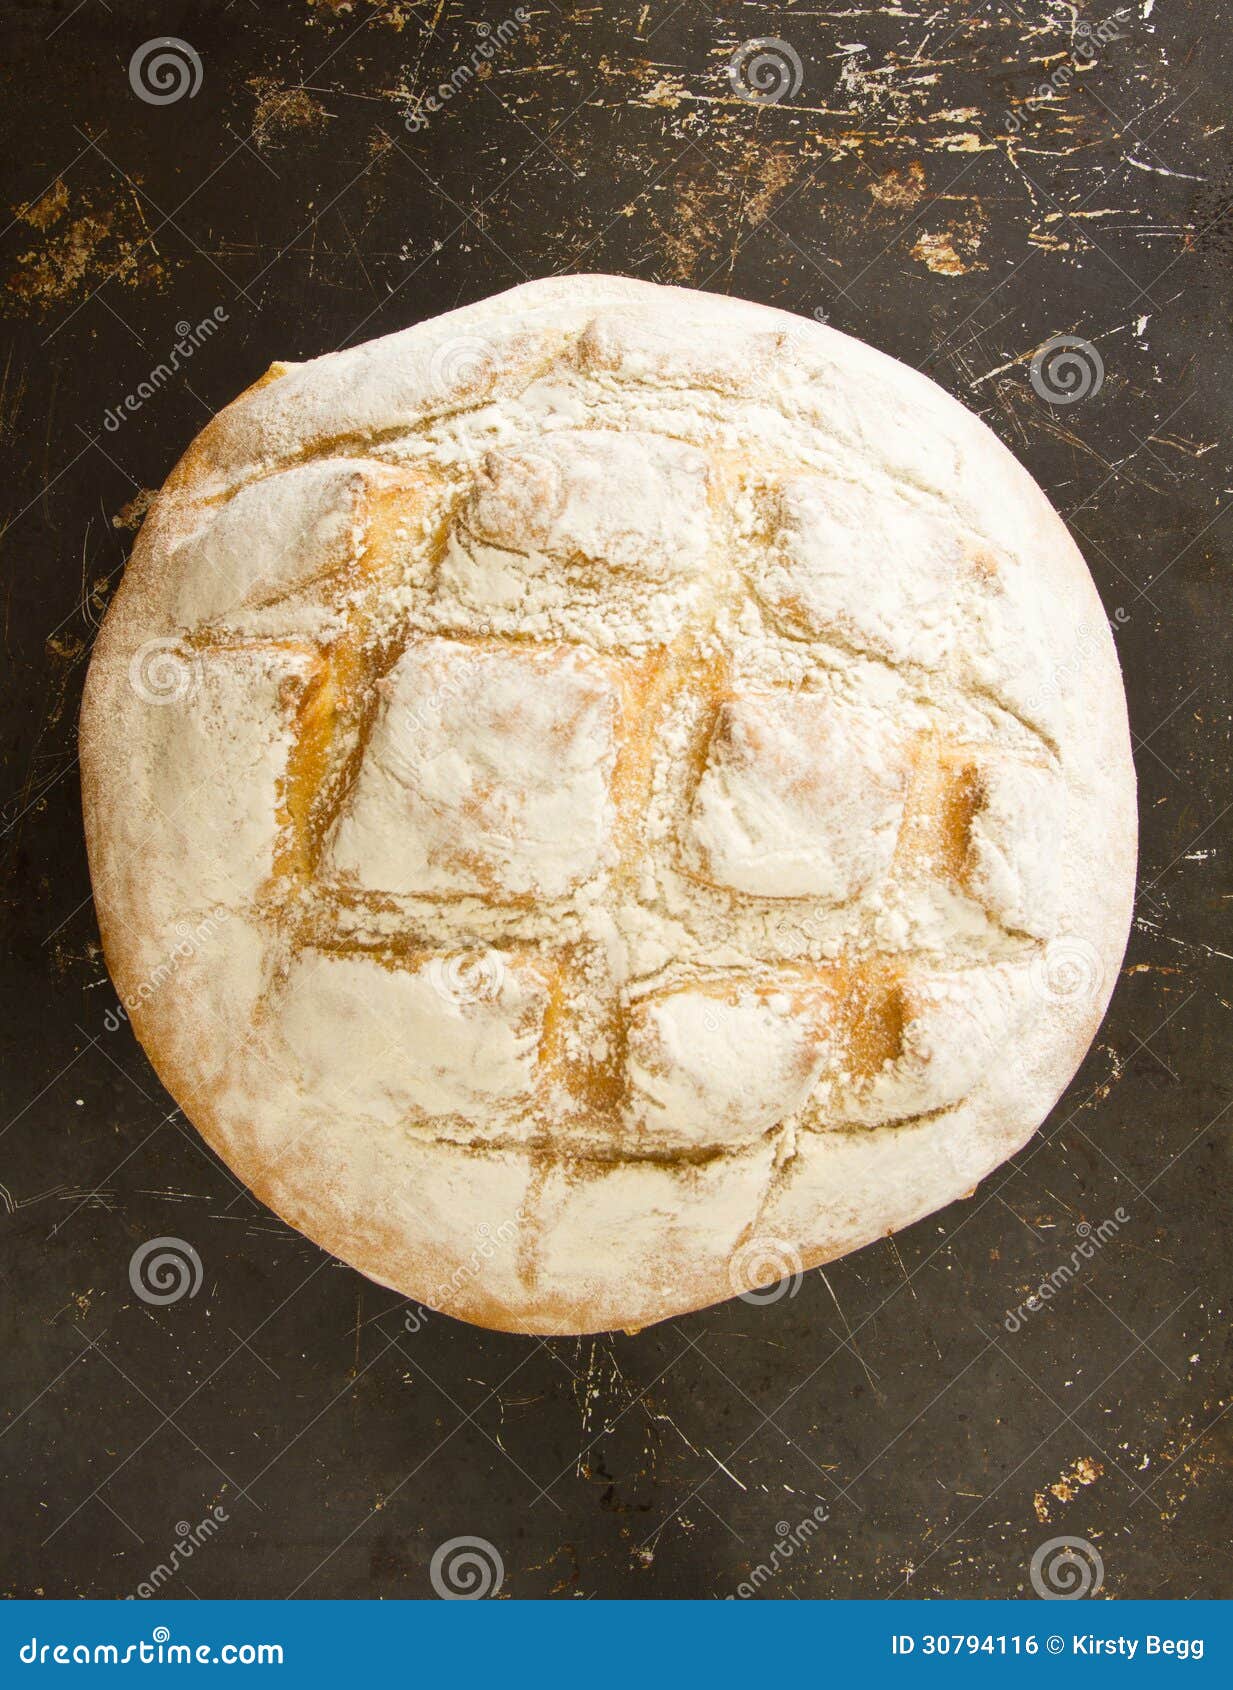 a whole english boule bread on distressed baking sheet